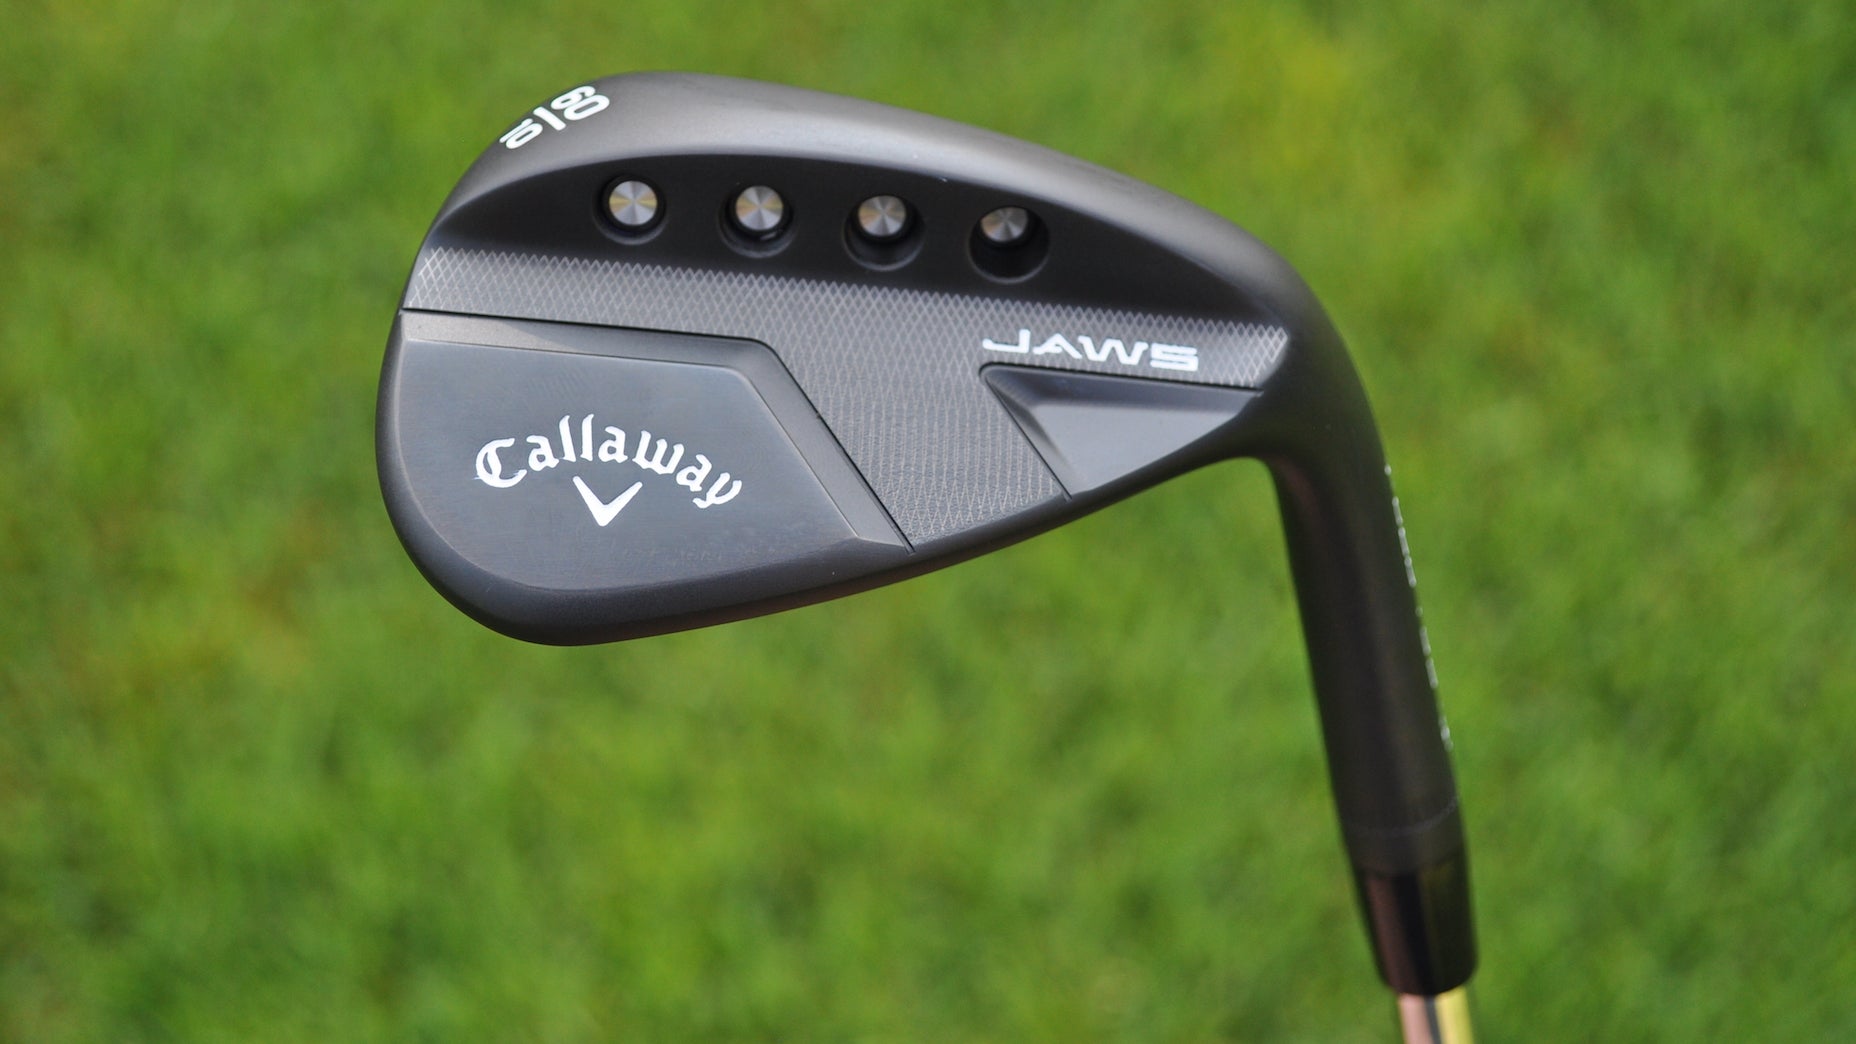 FIRST LOOK: Callaway's new Jaws Full Toe wedges for 2021